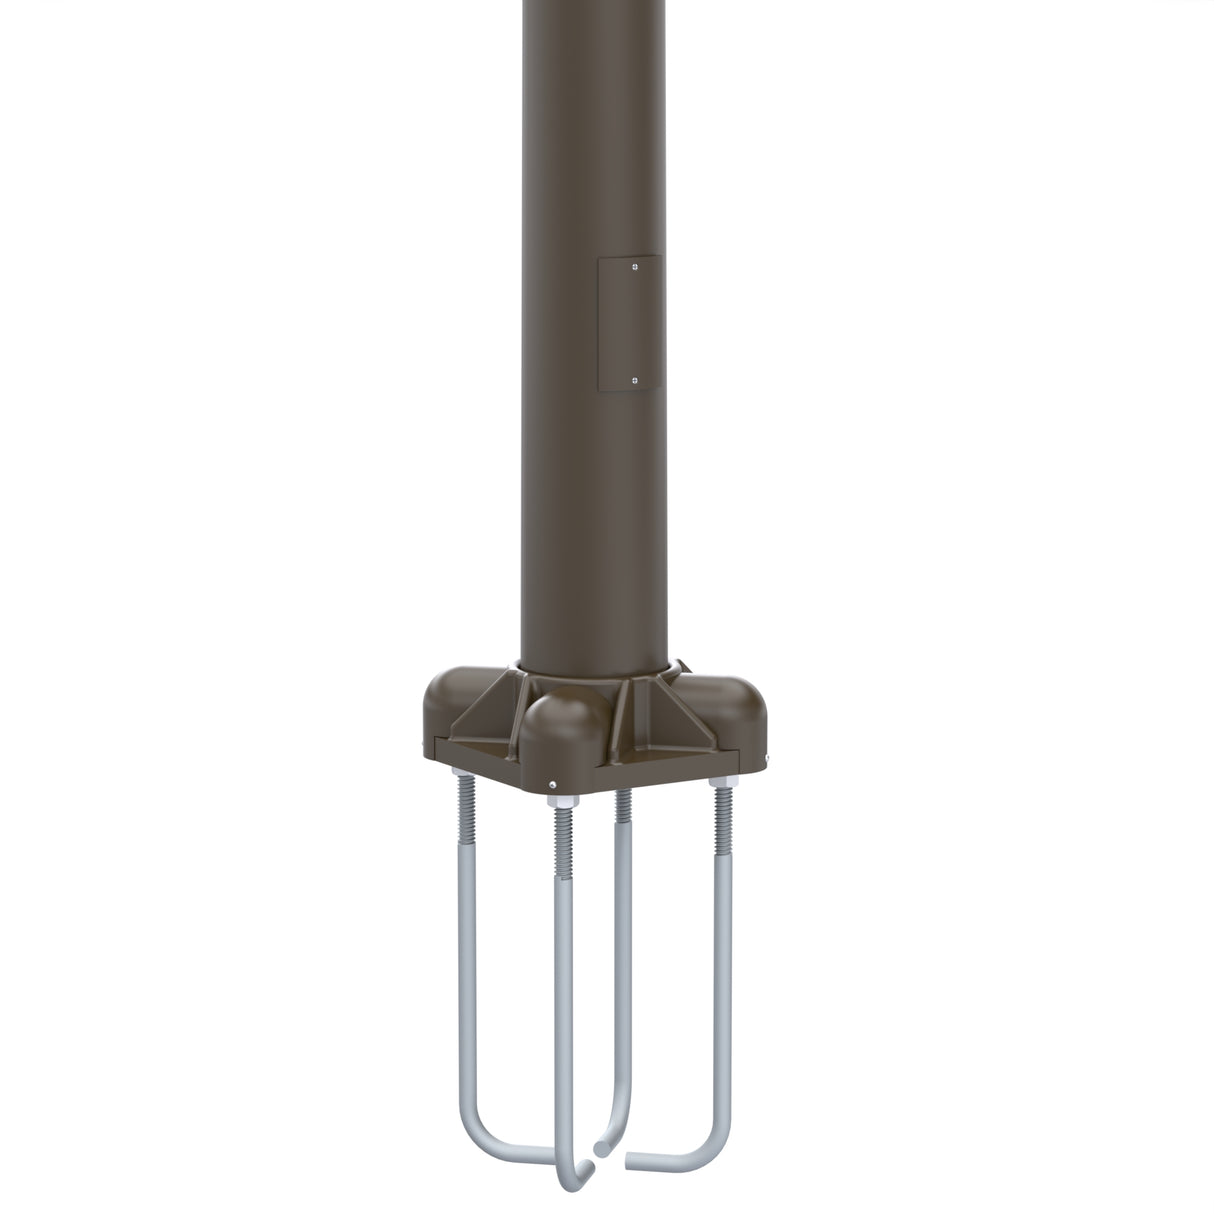 40' Tall x 8.0" Base OD x 4.5" Top OD x 0.156" Thick, Round Tapered Aluminum, Anchor Base Light Pole with 10' Davit Arm